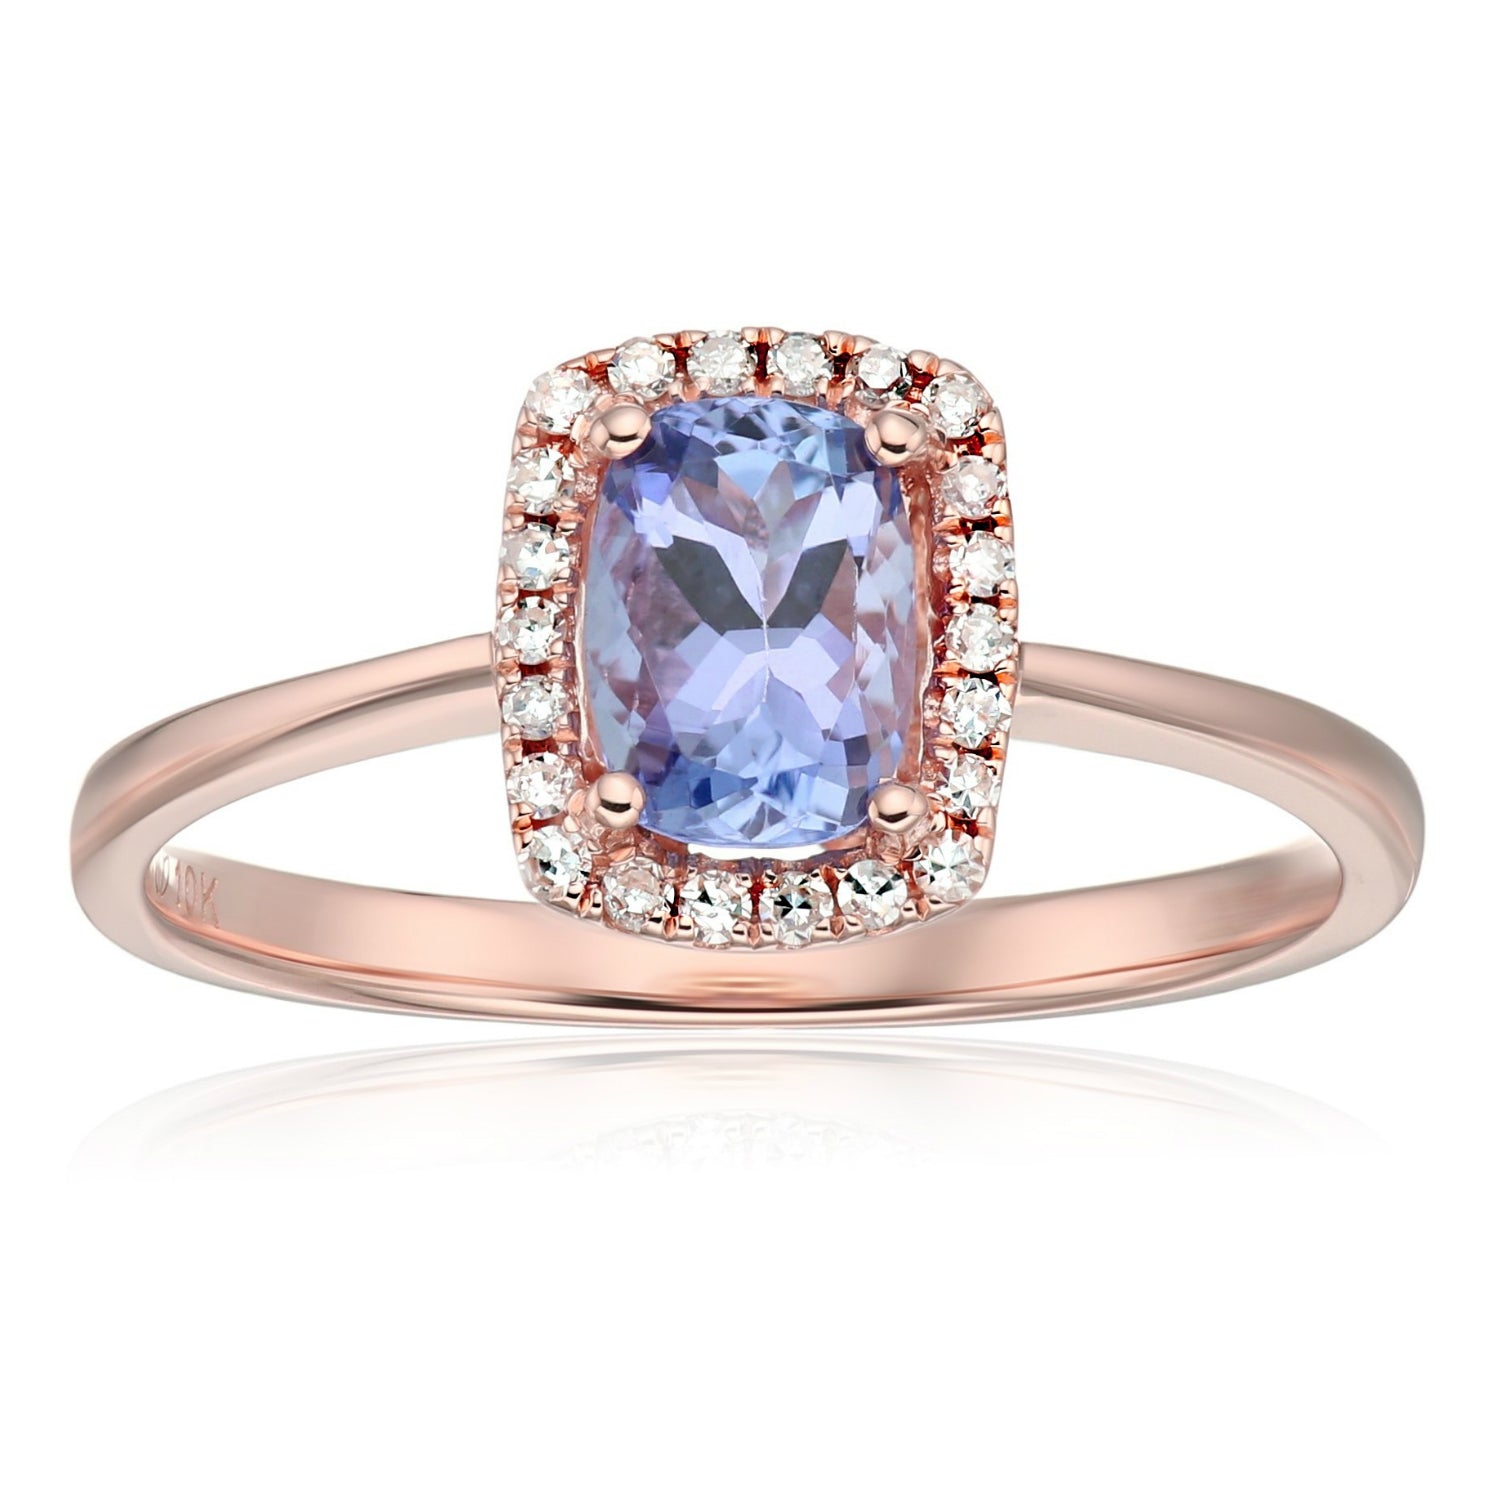 10k Rose Gold Tanzanite and Diamond Cushion Halo Engagement Ring (1/10cttw, H-I Color, I1-I2 Clarity), - pinctore